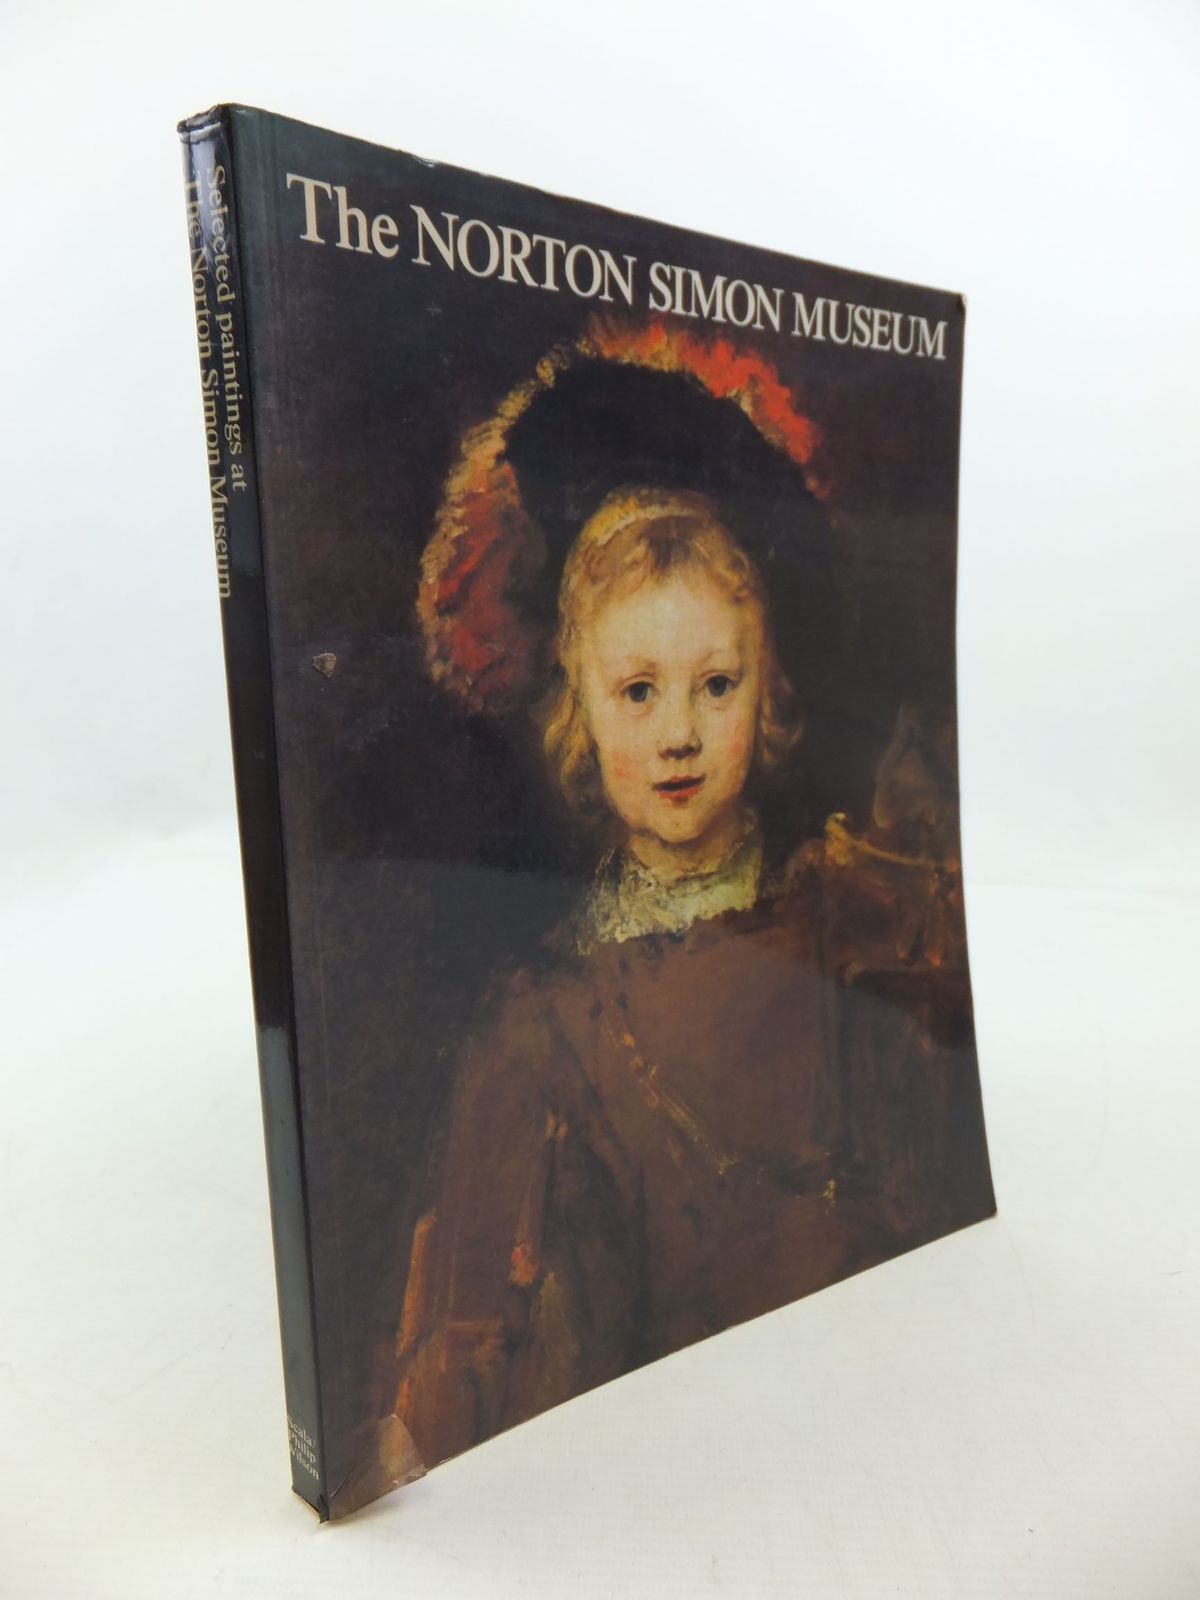 Photo of SELECTED PAINTINGS AT THE NORTON SIMON MUSEUM written by Herrmann, Frank published by Scala Books, Philip Wilson (STOCK CODE: 2112448)  for sale by Stella & Rose's Books